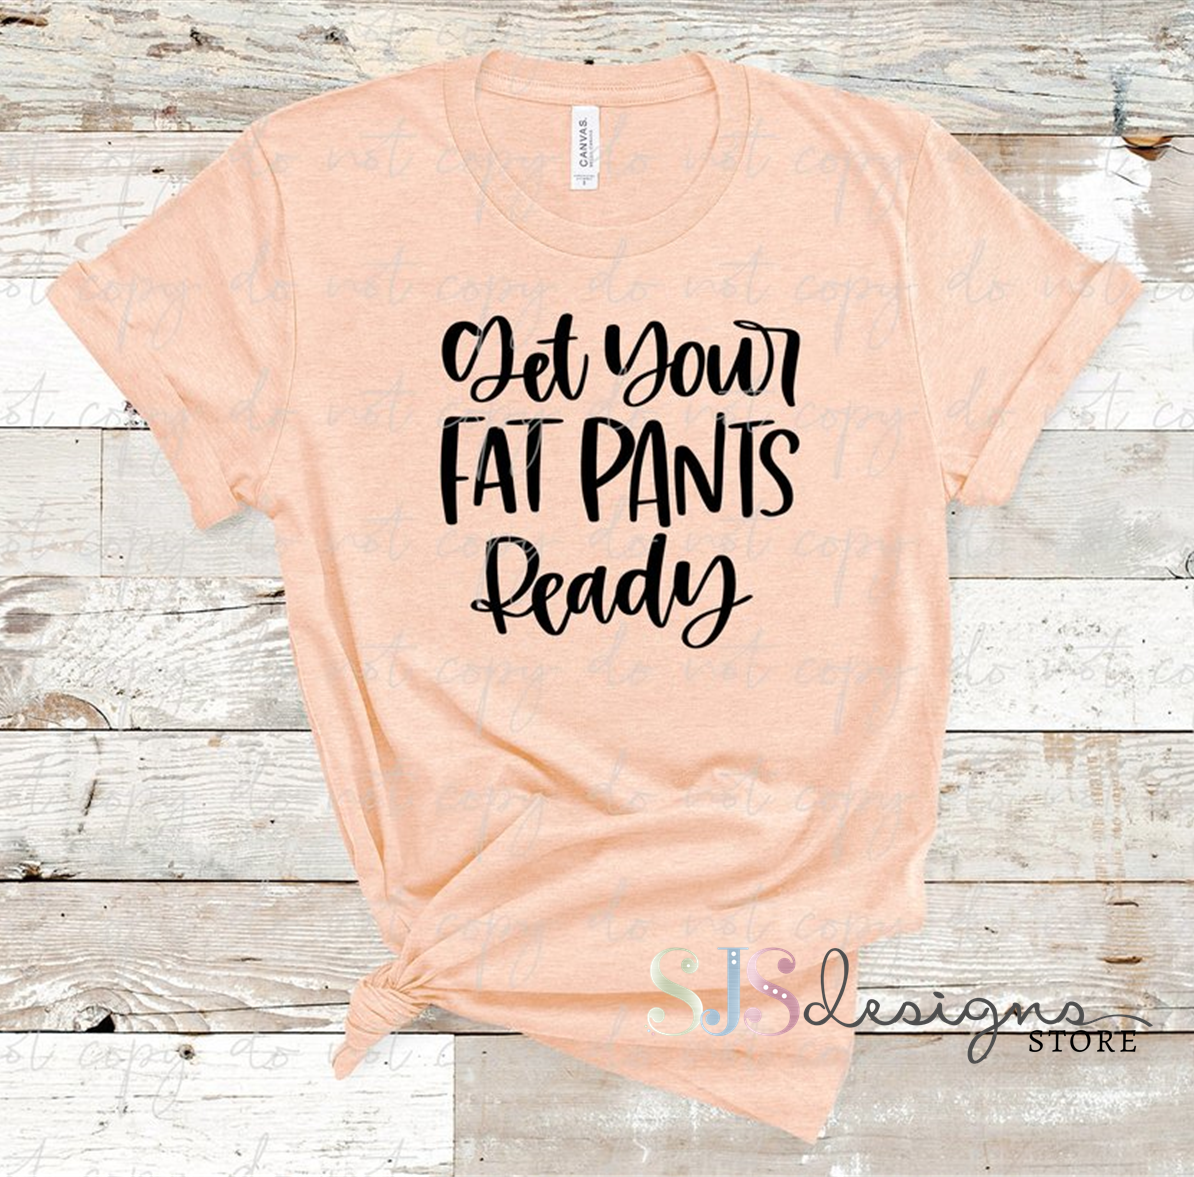 Get Your Fat Pants Ready Shirt